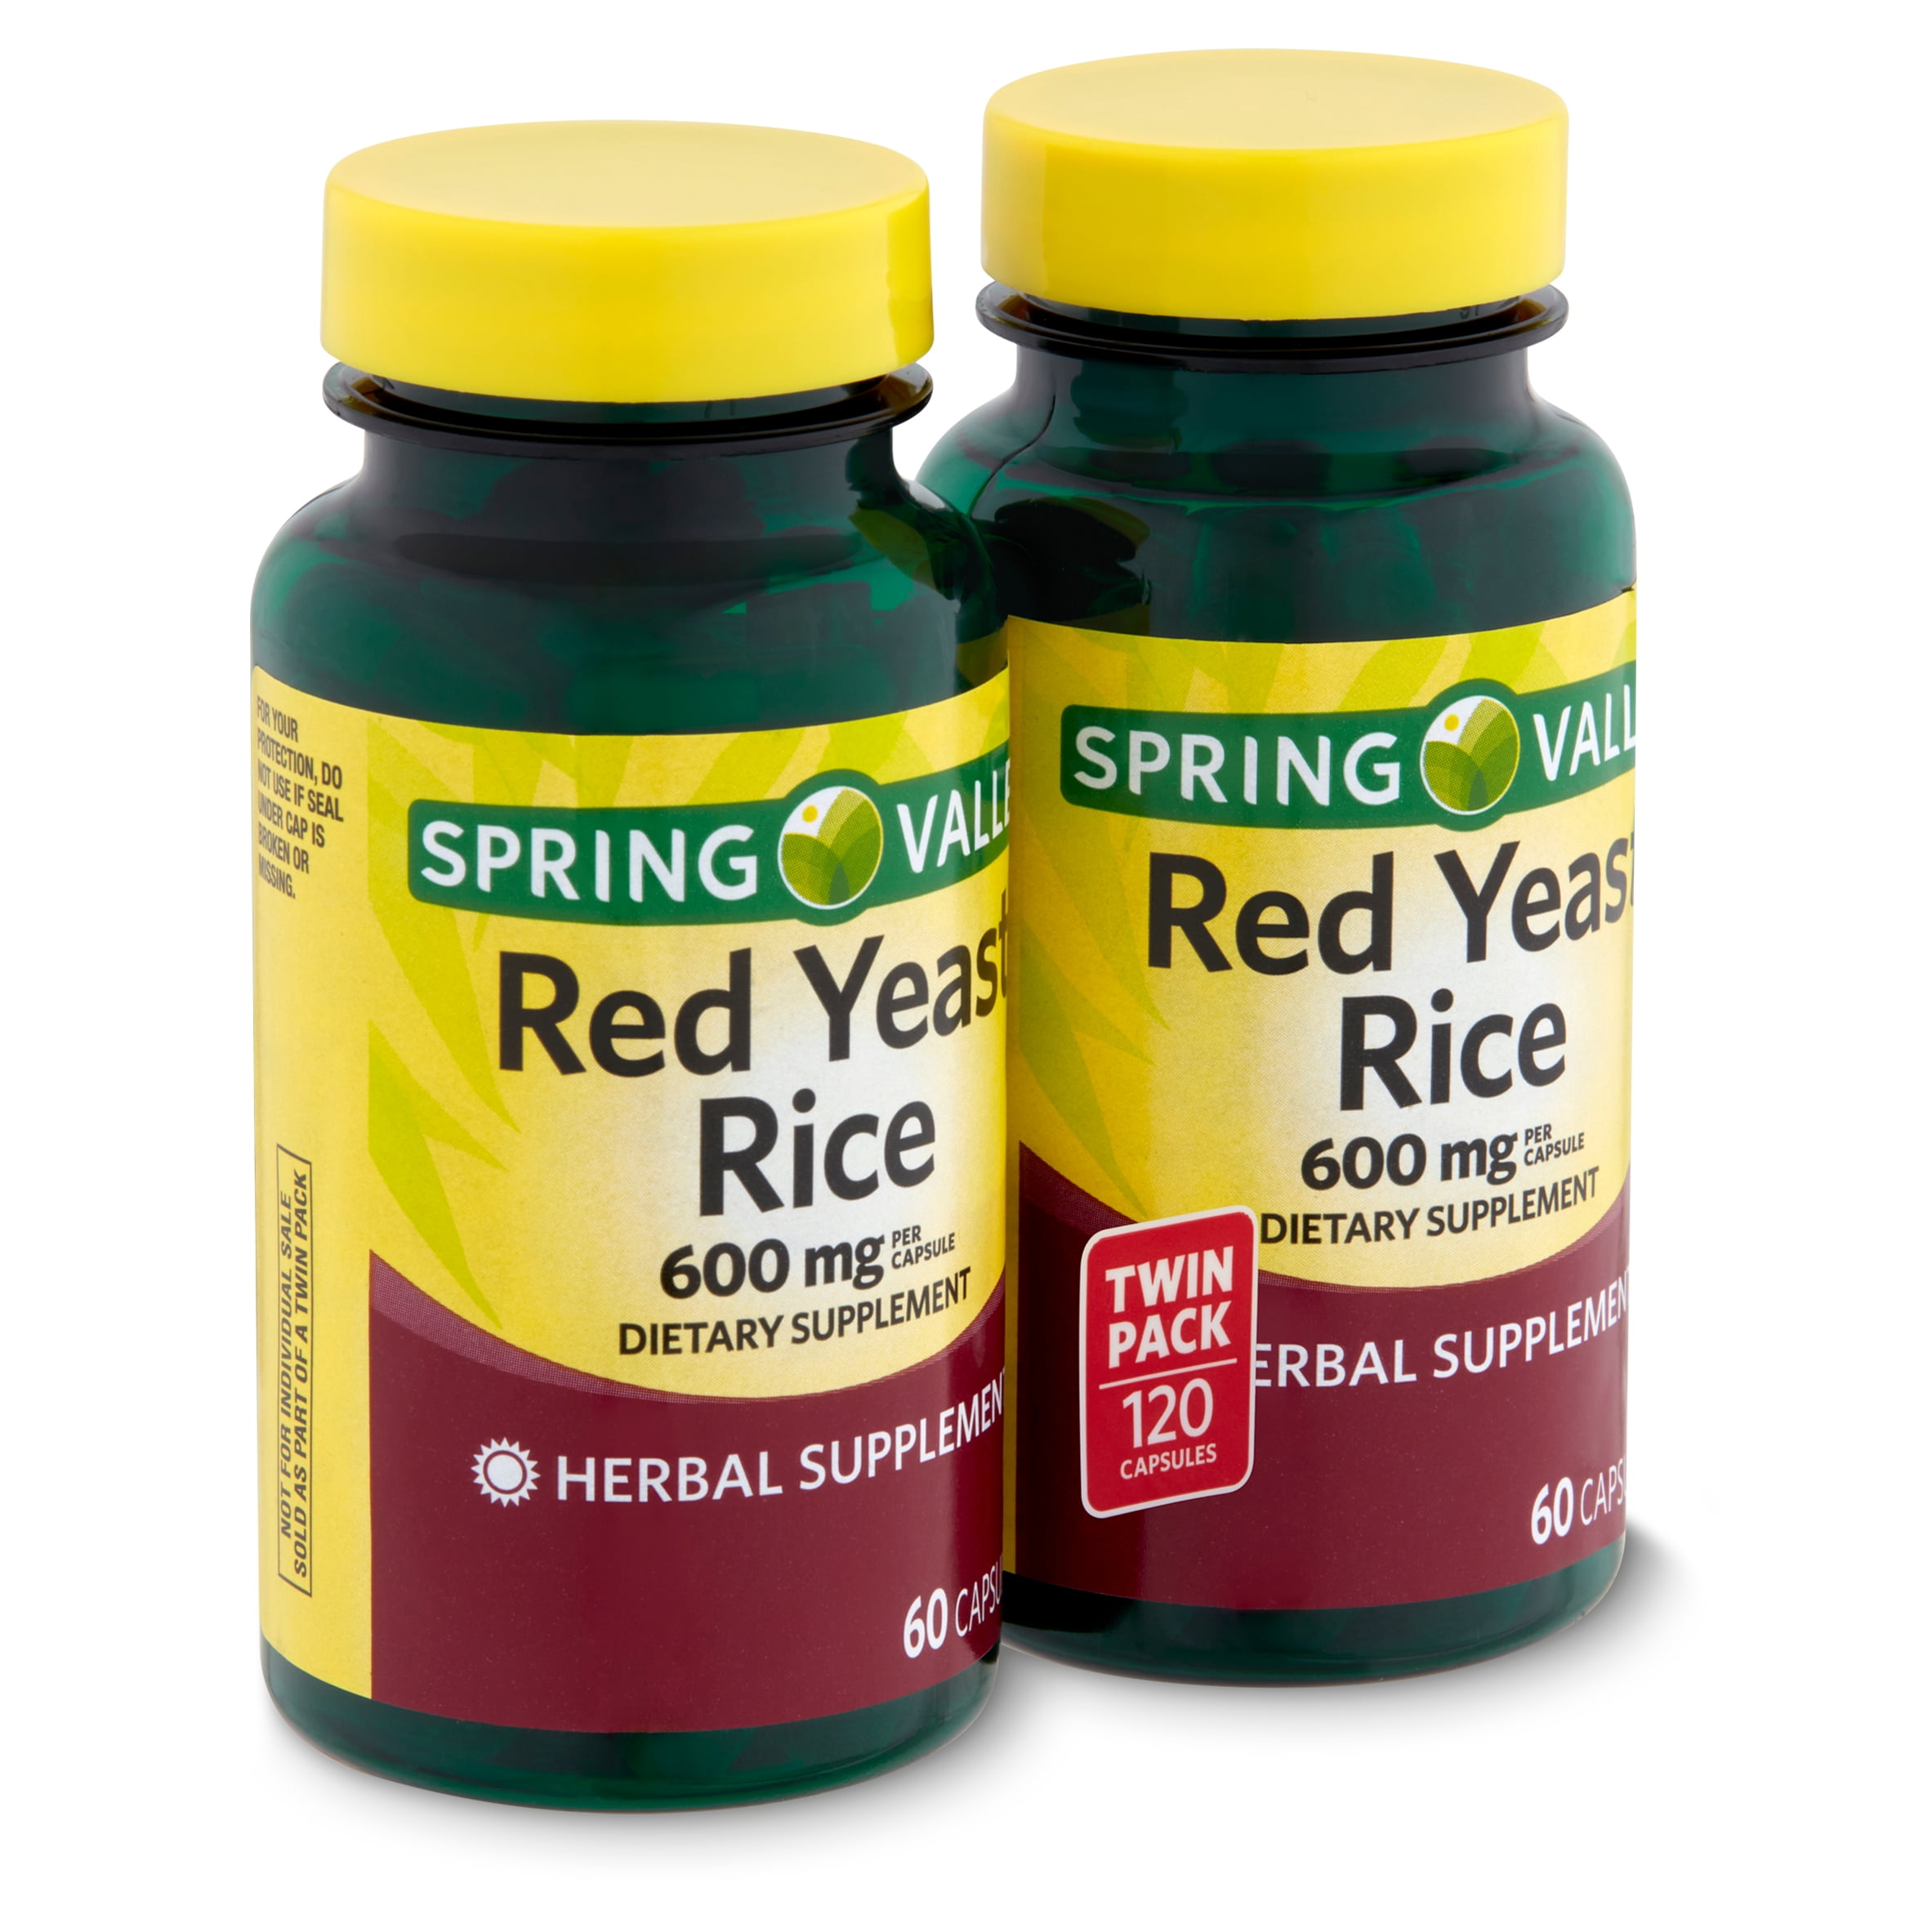 Kiks Betjening mulig Antologi Spring Valley Red Yeast Rice Dietary Supplement Capsules Twin Pack, 600 mg,  60 Count - Walmart.com